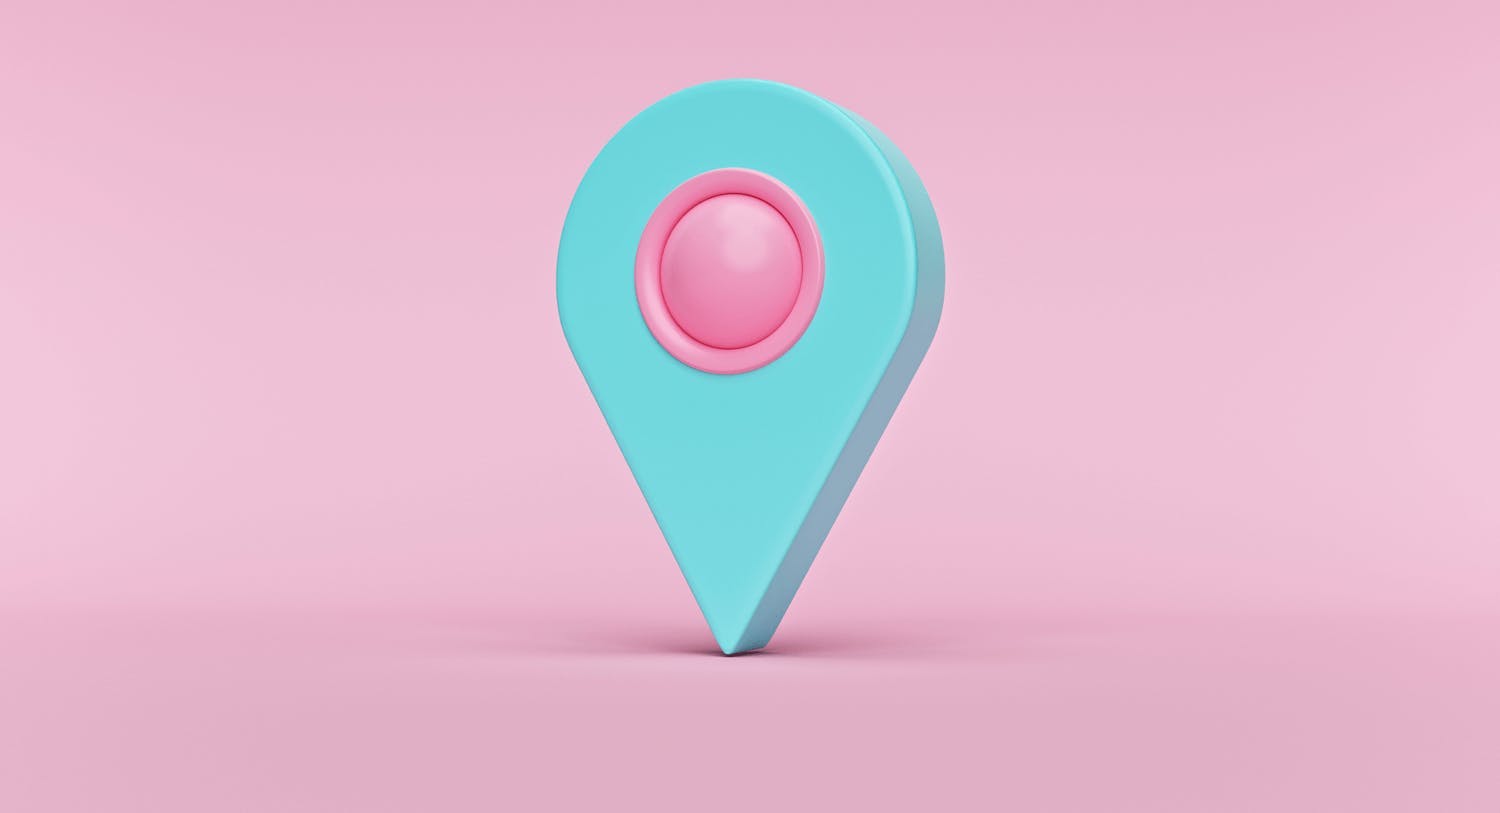 Illustration of a geolocation icon